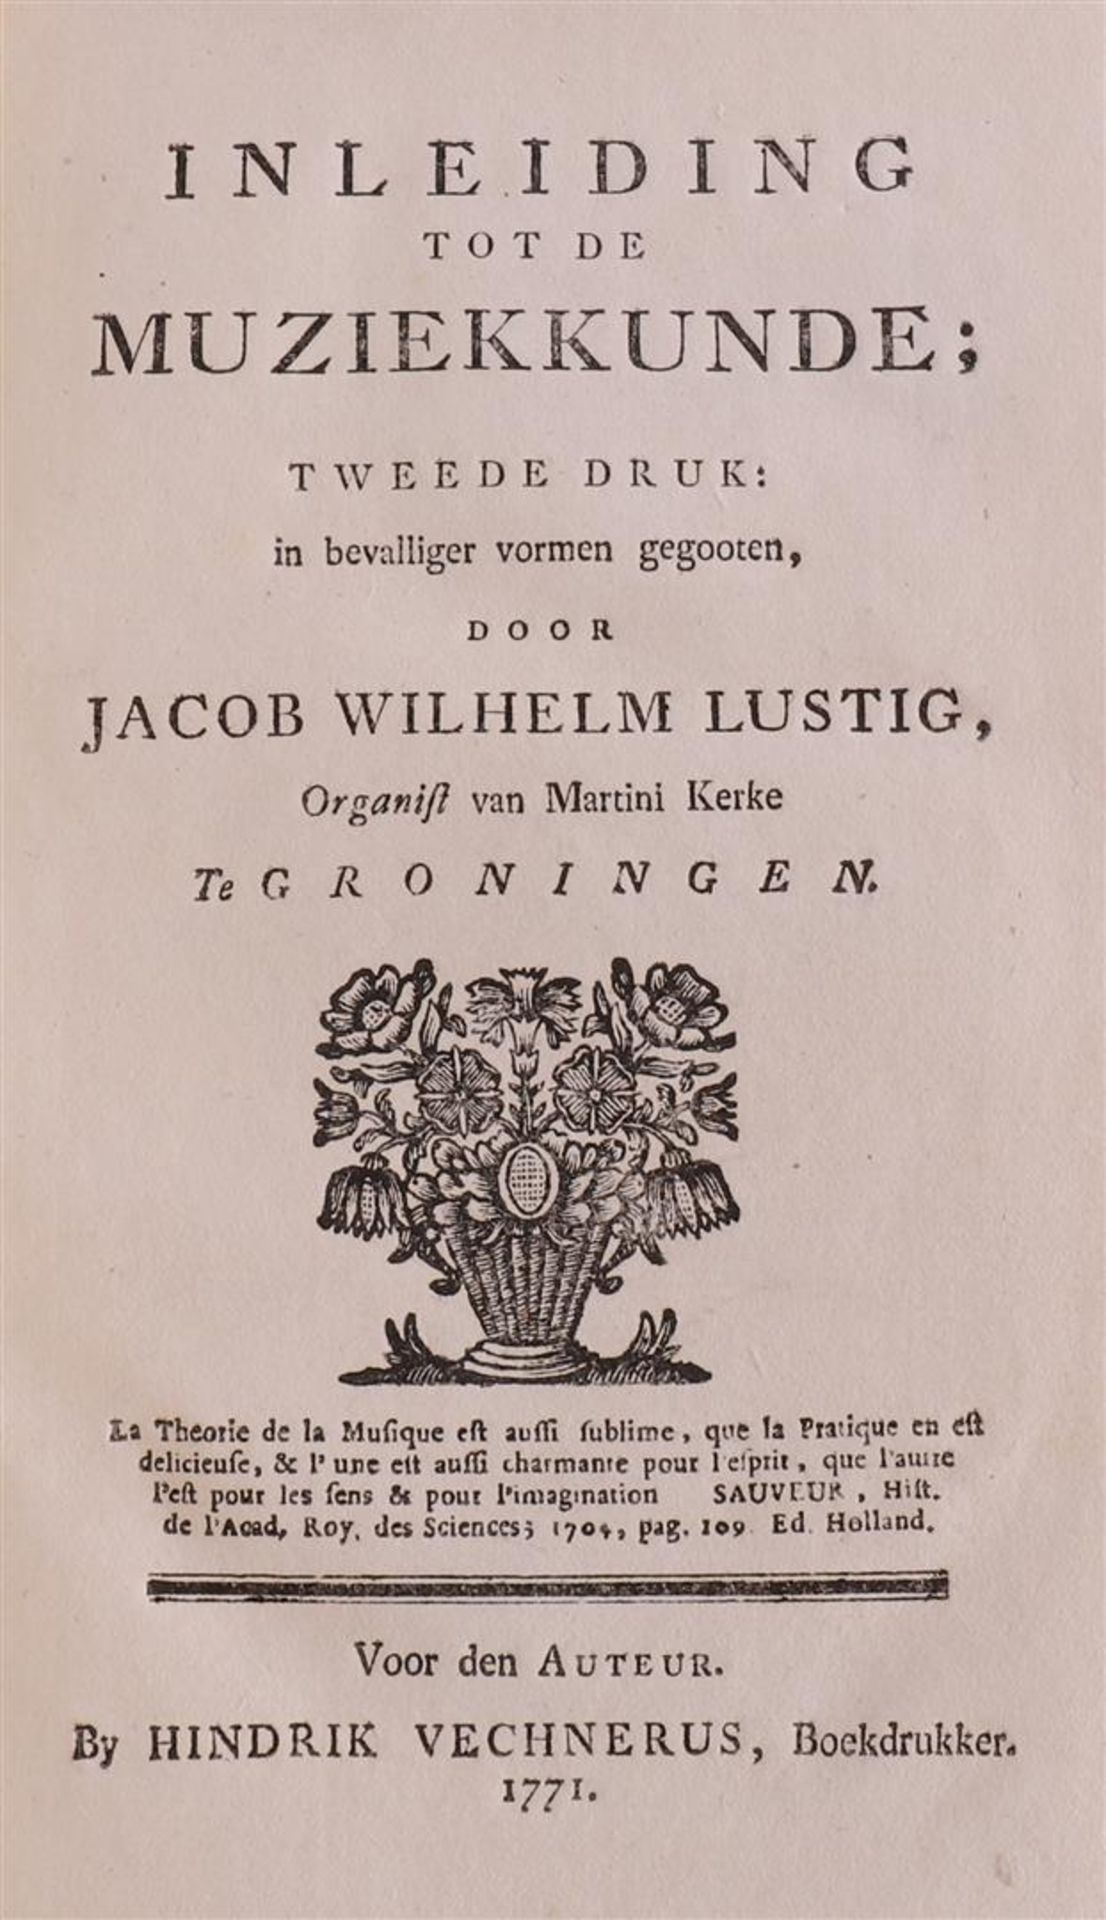 Jacob Wilhelm Lustig. “Introduction to Musicology”. Published in 1771. - Image 2 of 2